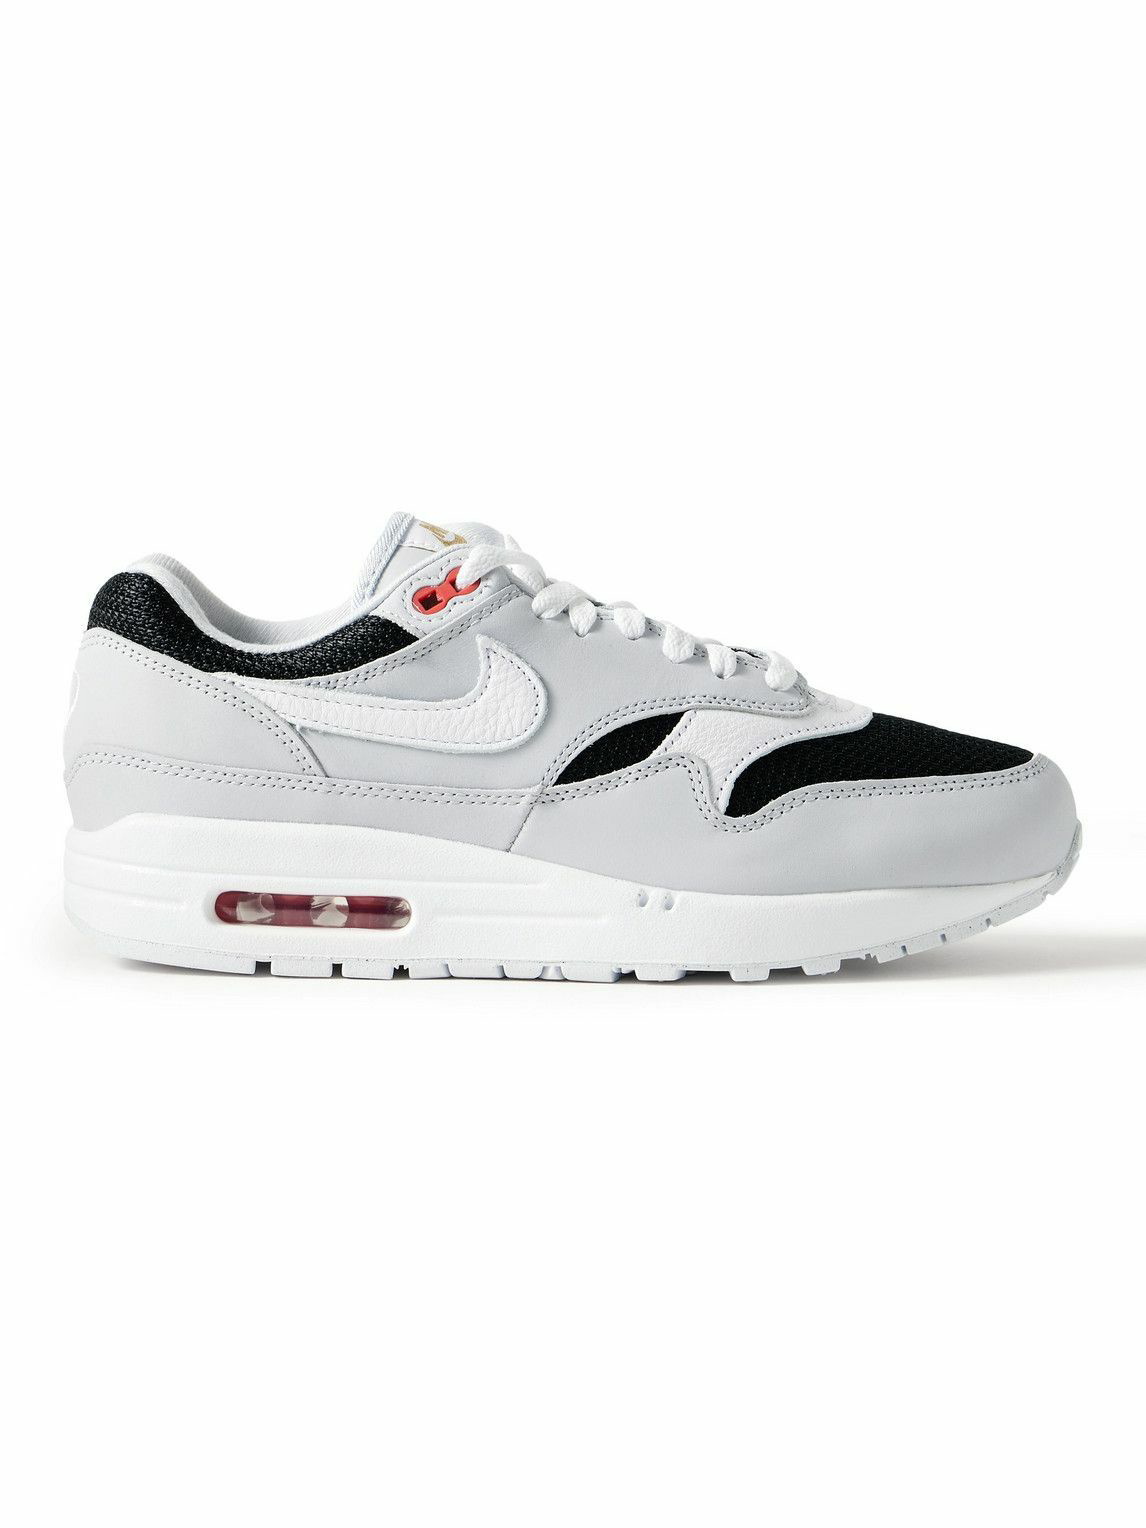 Nike - Air Max 1 Suede, Mesh and Textured-Leather Sneakers - Gray Nike